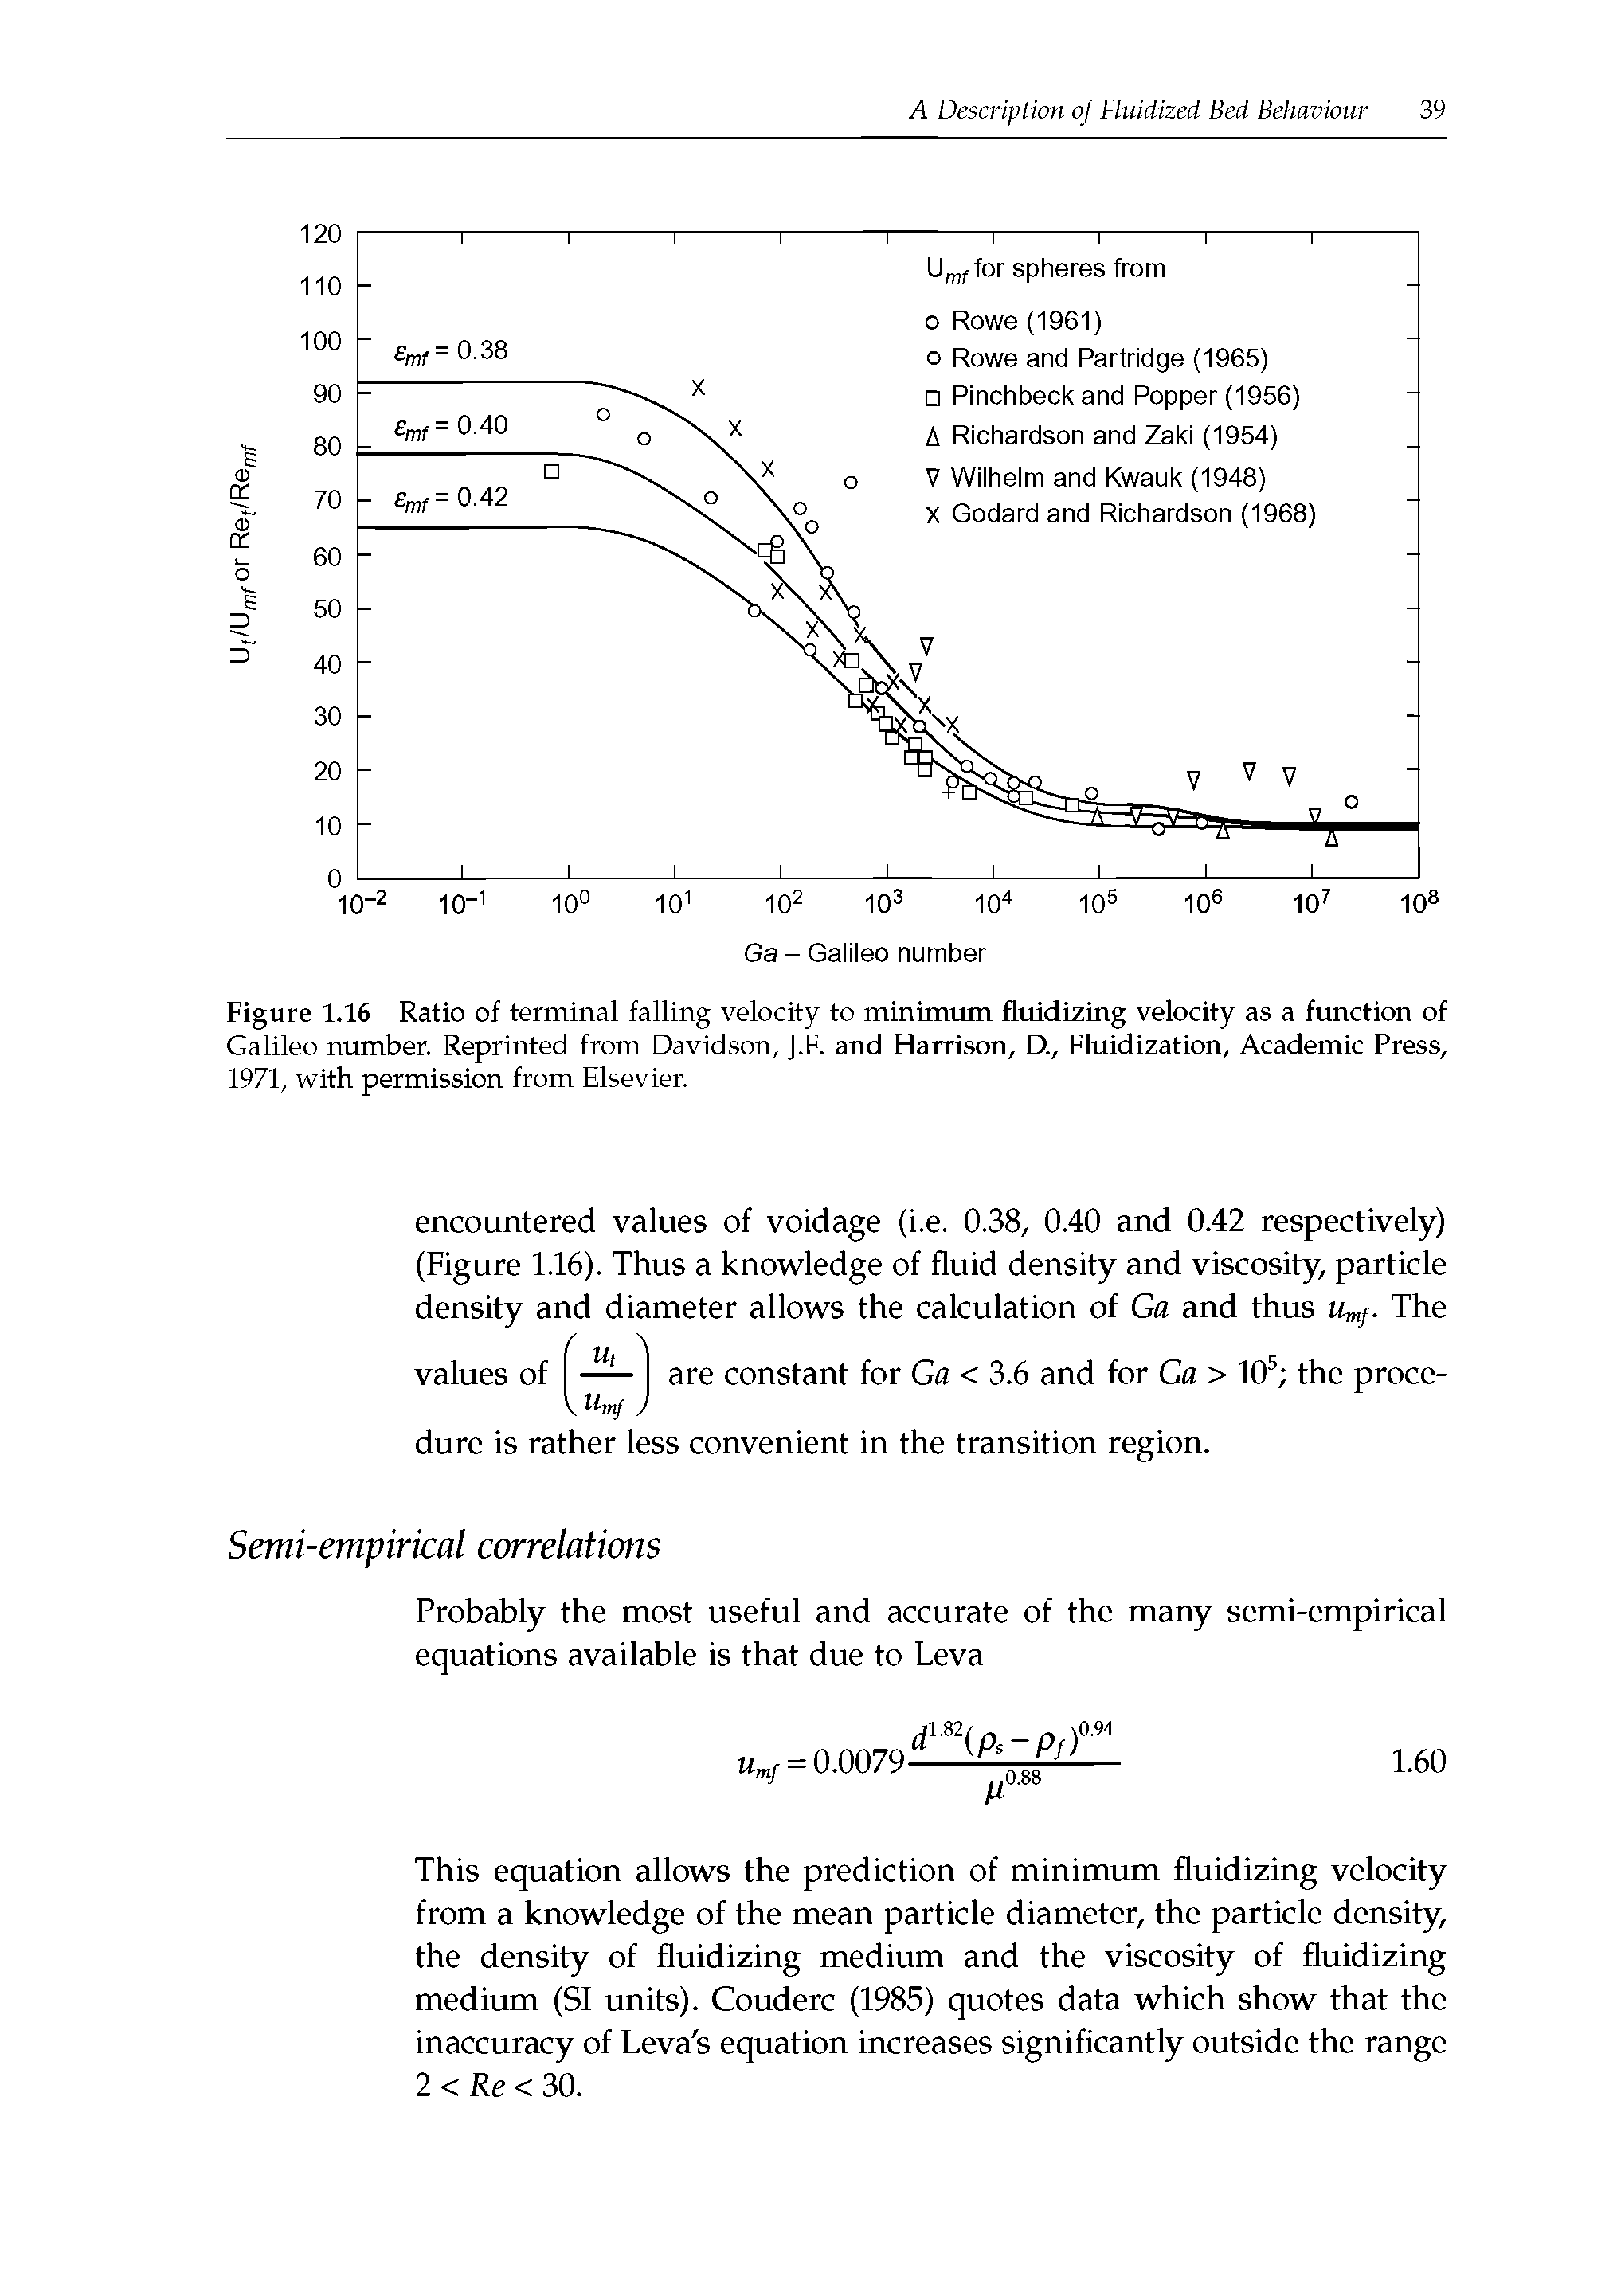 Figure 1.16 Ratio of terminal falling velocity to minimum fluidizing velocity as a function of Galileo number. Reprinted from Davidson, J.F. and Harrison, D., Fluidization, Academic Press, 1971, with permission from Elsevier.